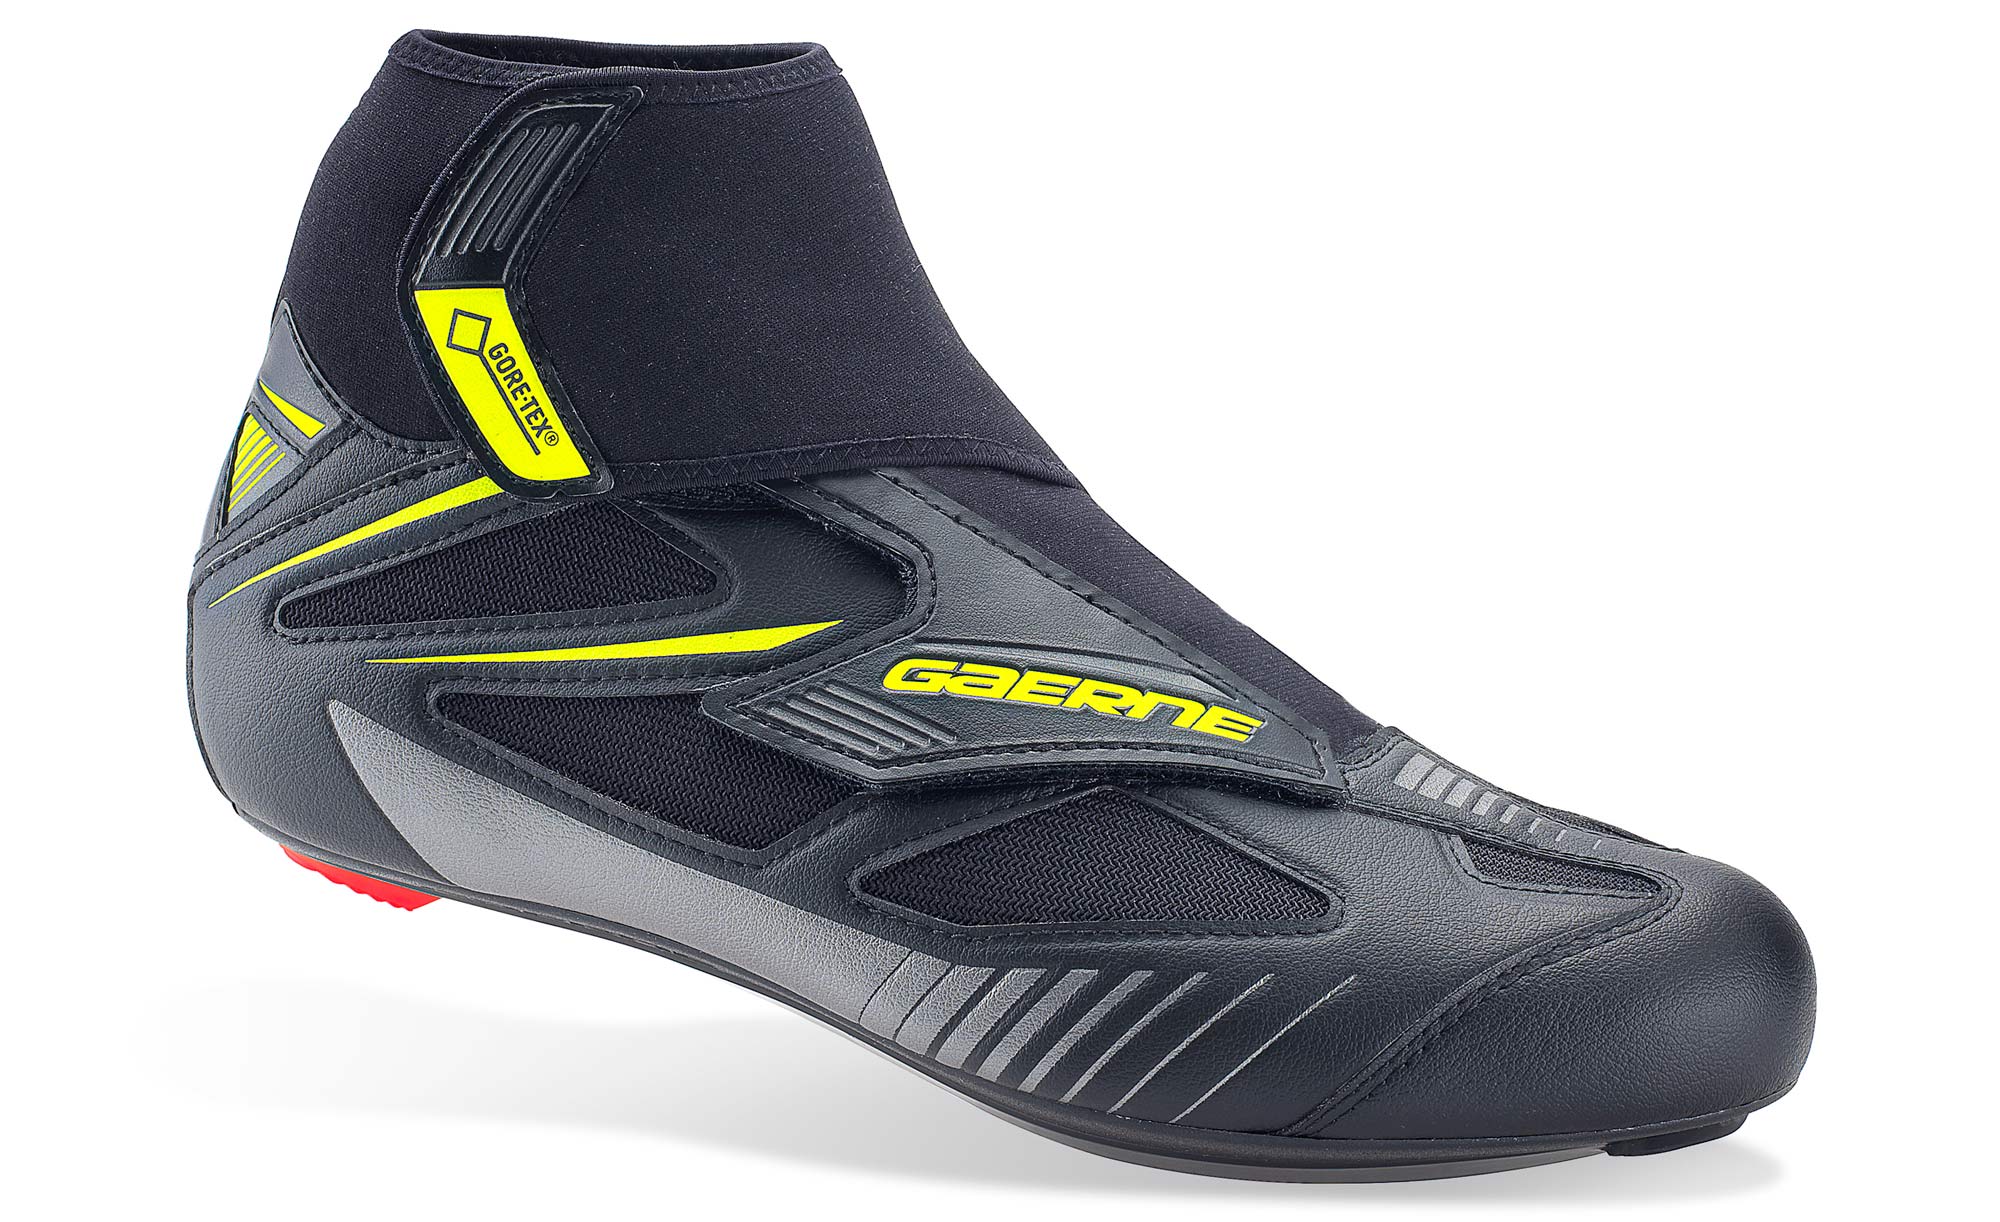 Gaerne G.Winter ready for cold roads & trails with Gore-Tex cycling shoes